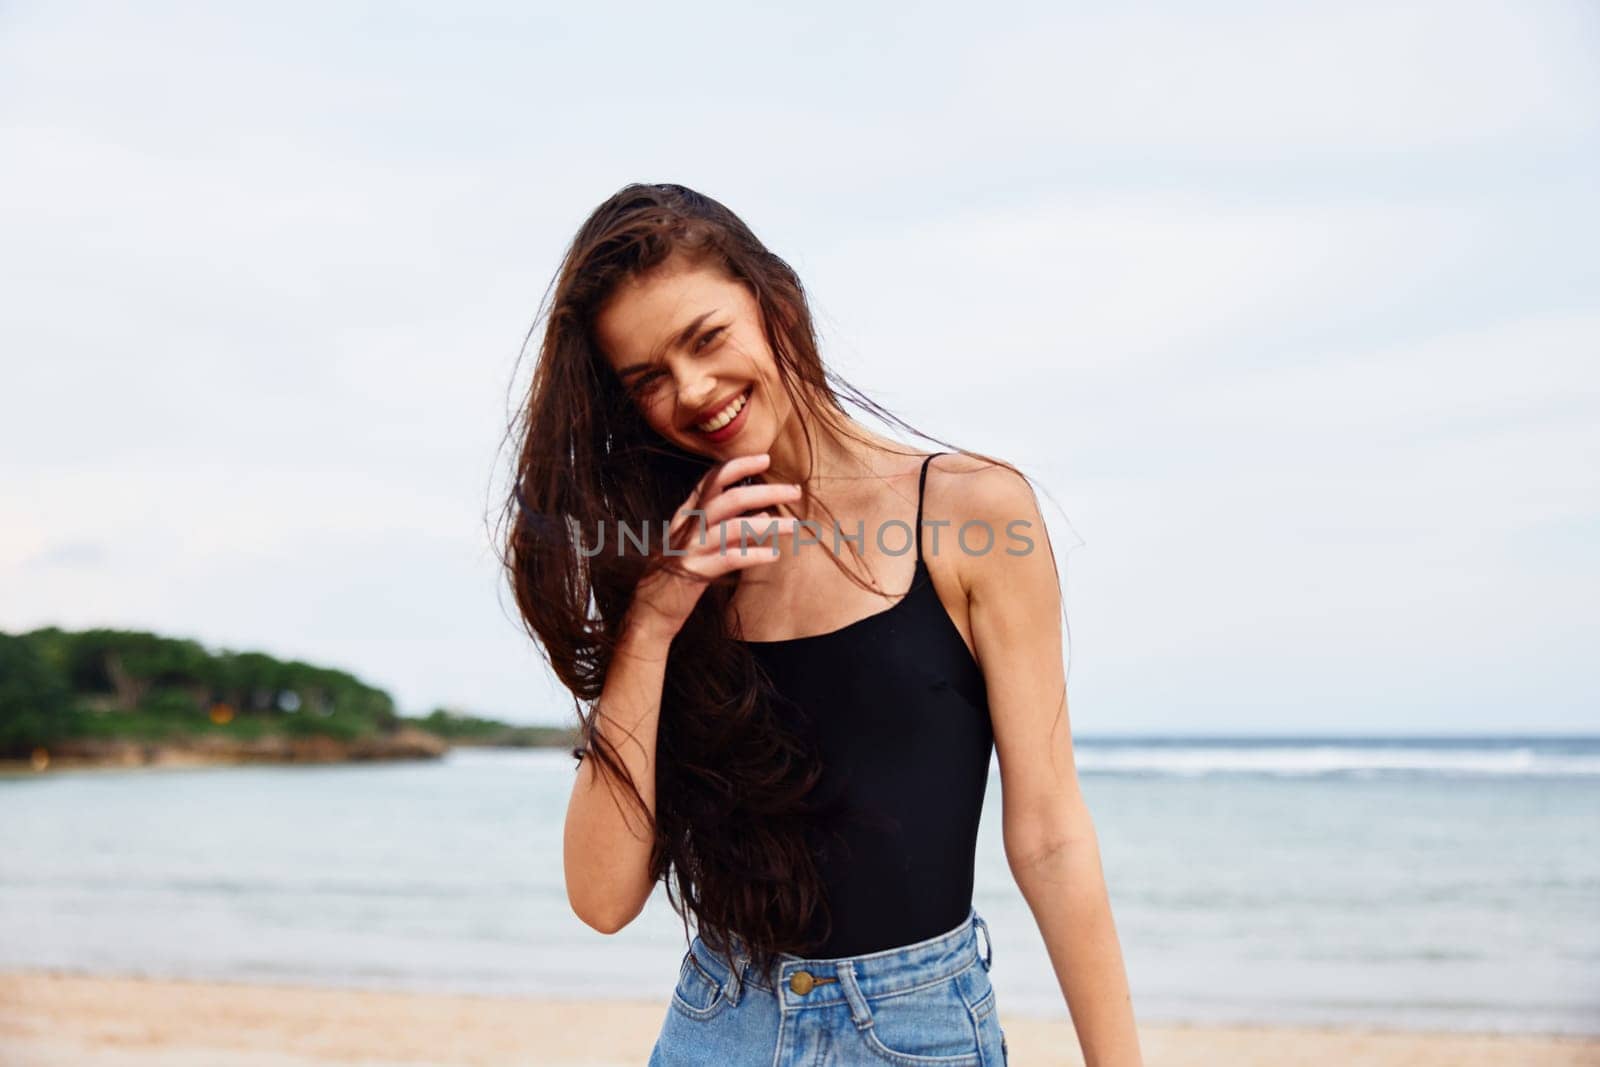 woman sunset beach summer lifestyle sand sea travel young running smile by SHOTPRIME